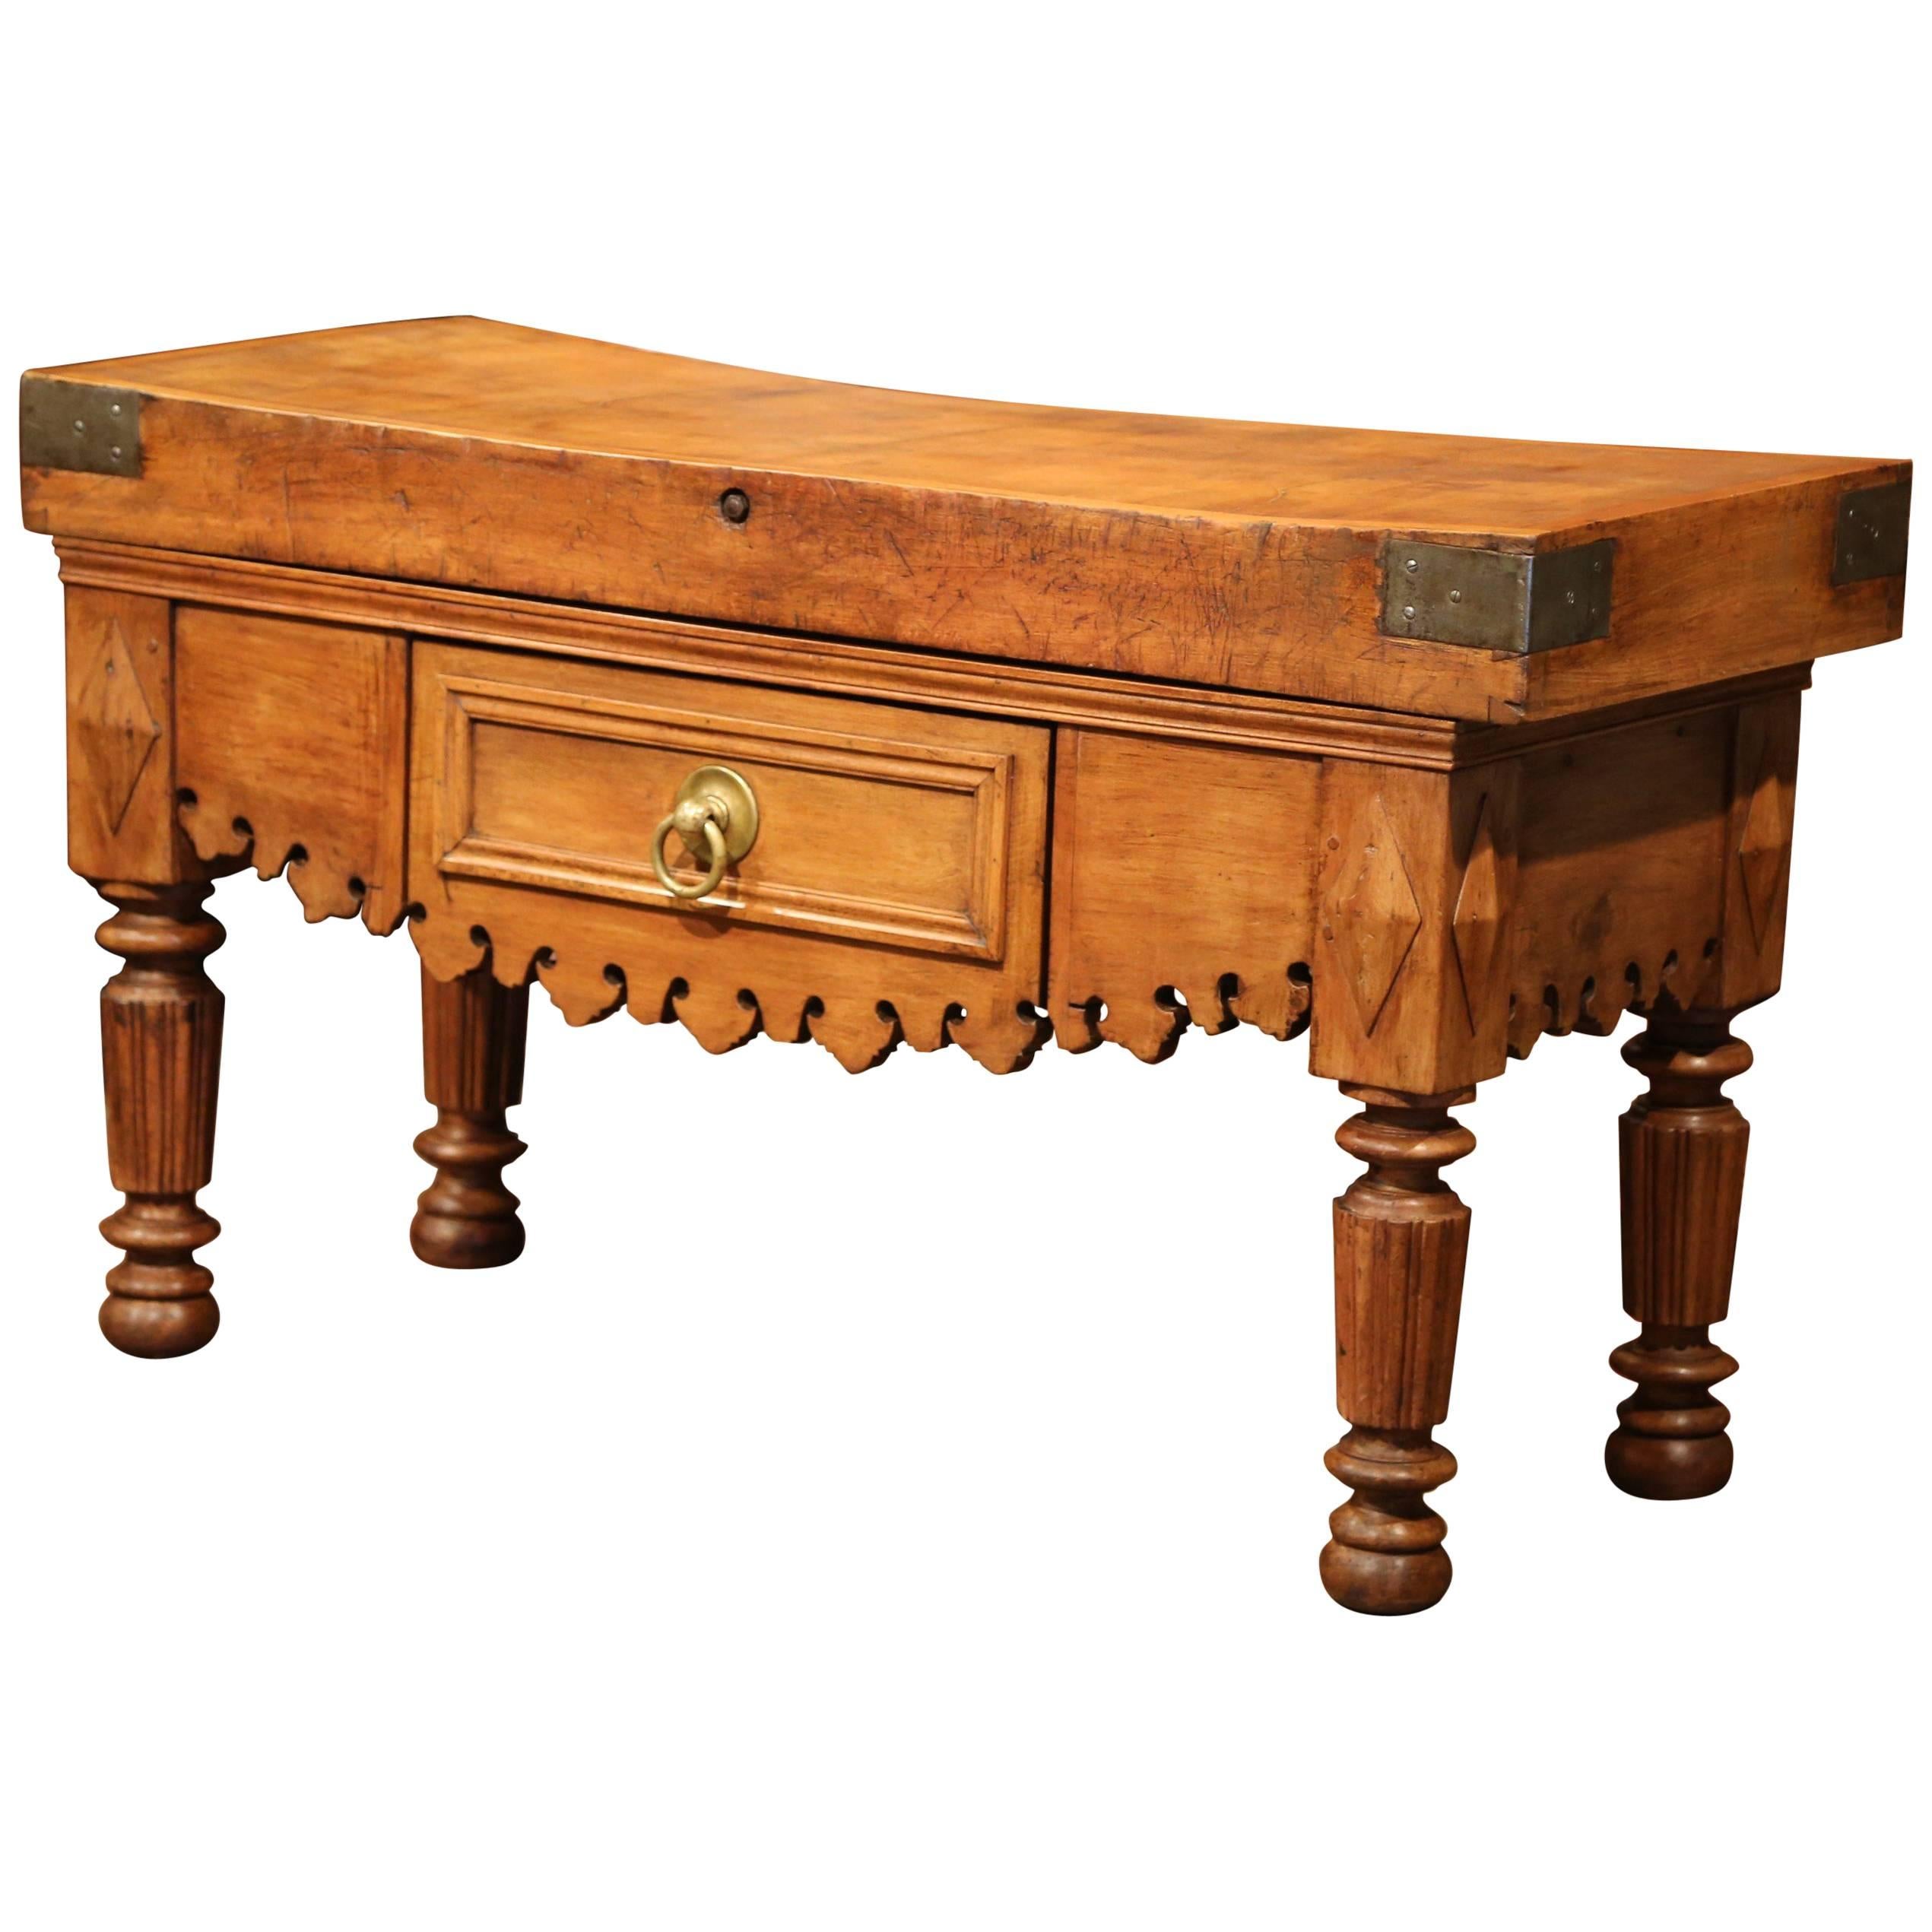 19th Century French Carved Butcher Block Table with Centre Drawer and Brass Pull